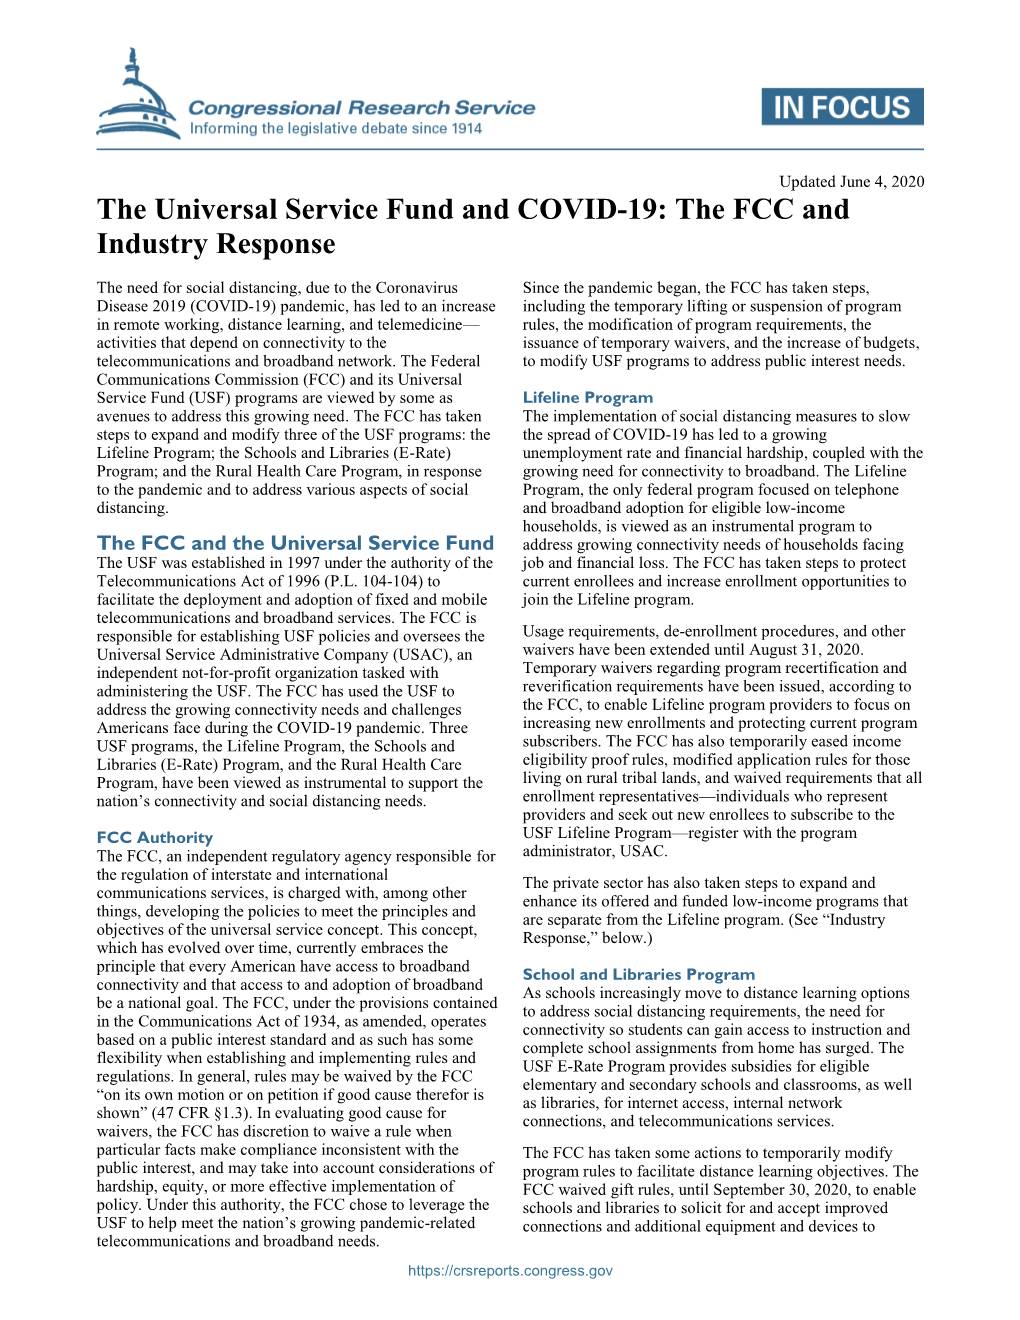 The Universal Service Fund and COVID-19: the FCC and Industry Response